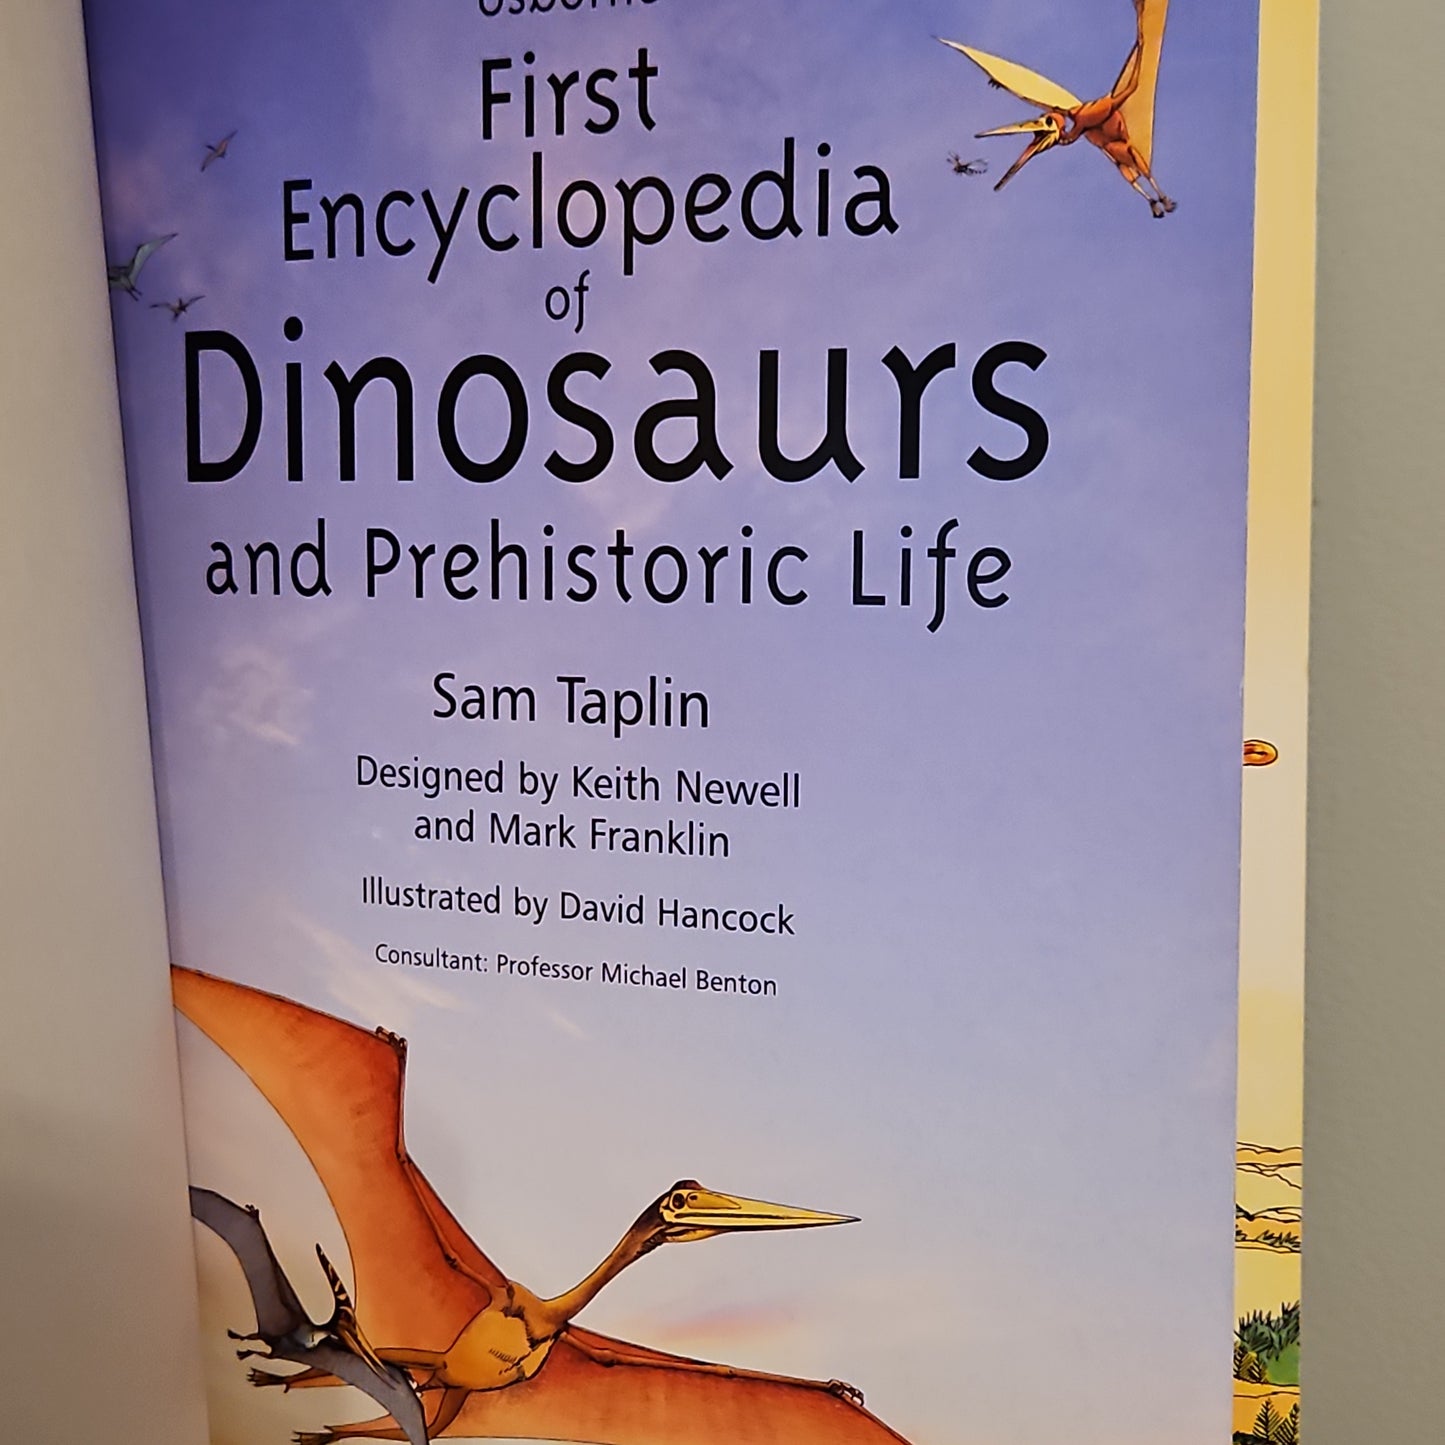 Internet Linked First Encyclopedia of Dinosaurs and Prehistoric Life By Usborne 2004